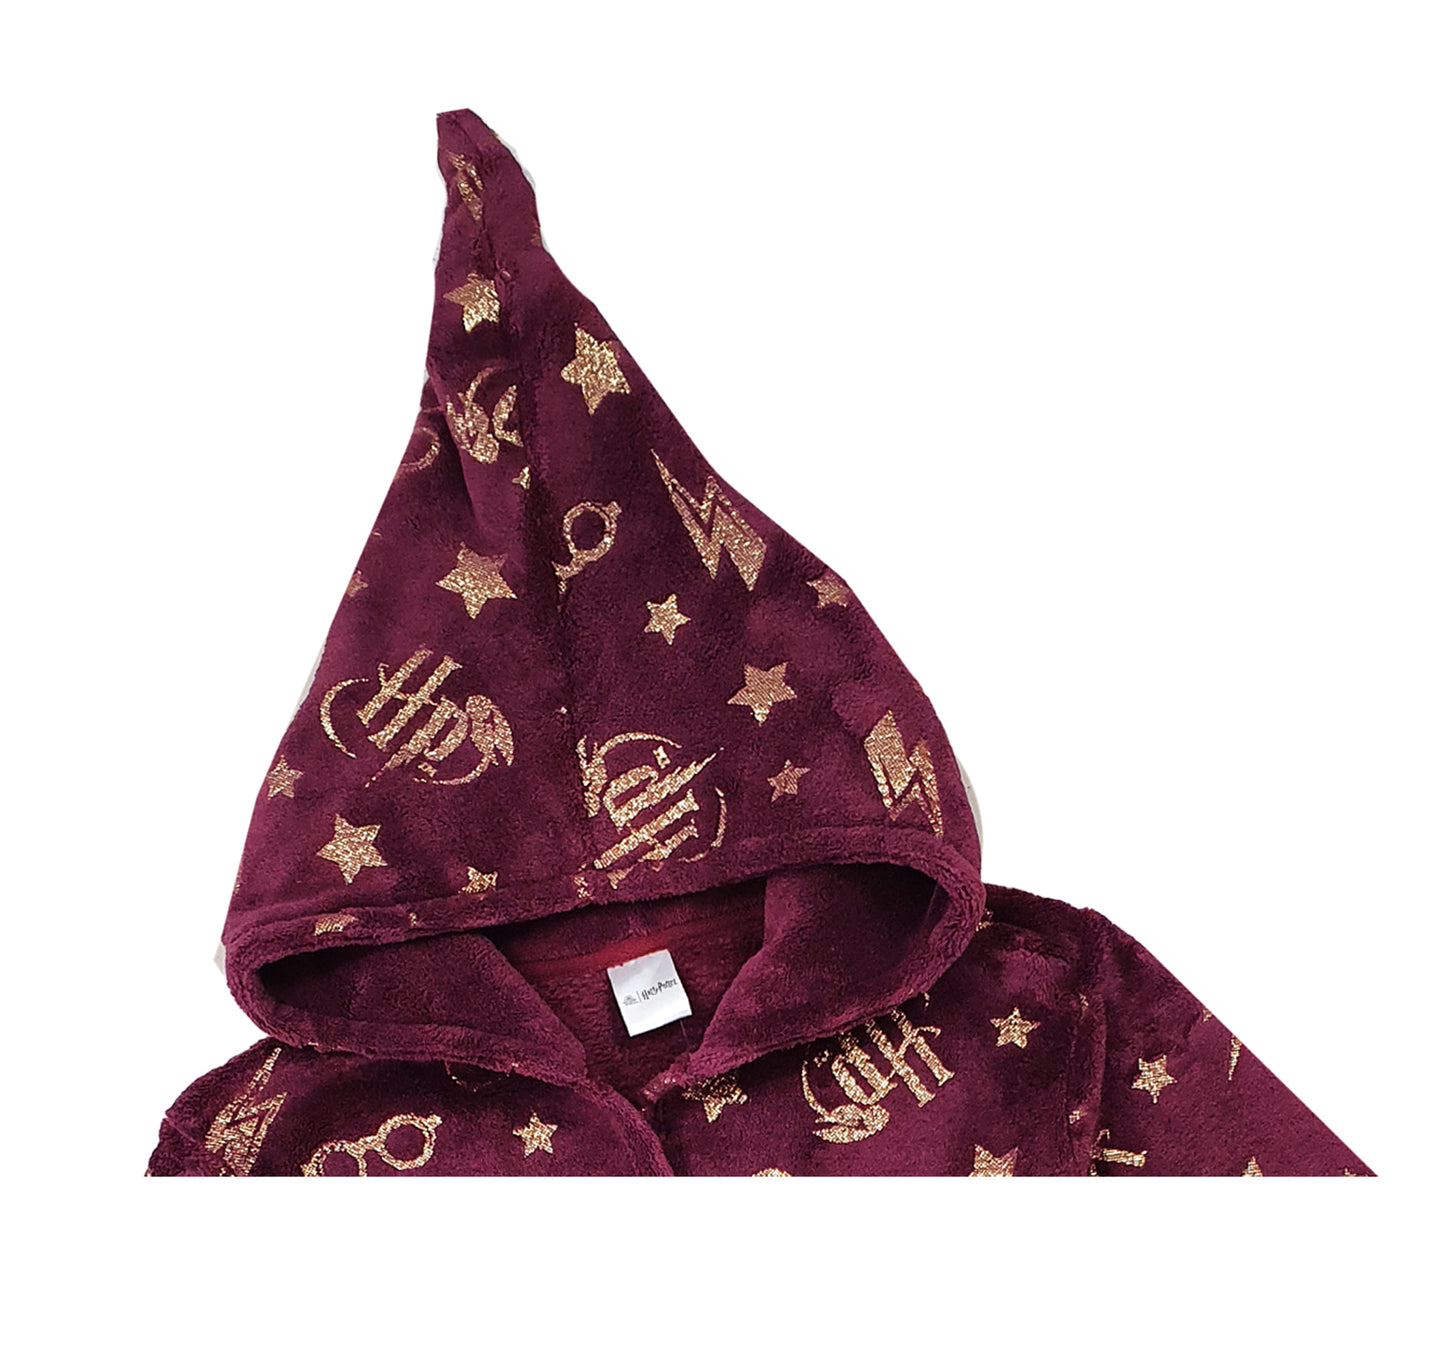 Childrens Harry Potter Dressing Gown Robe